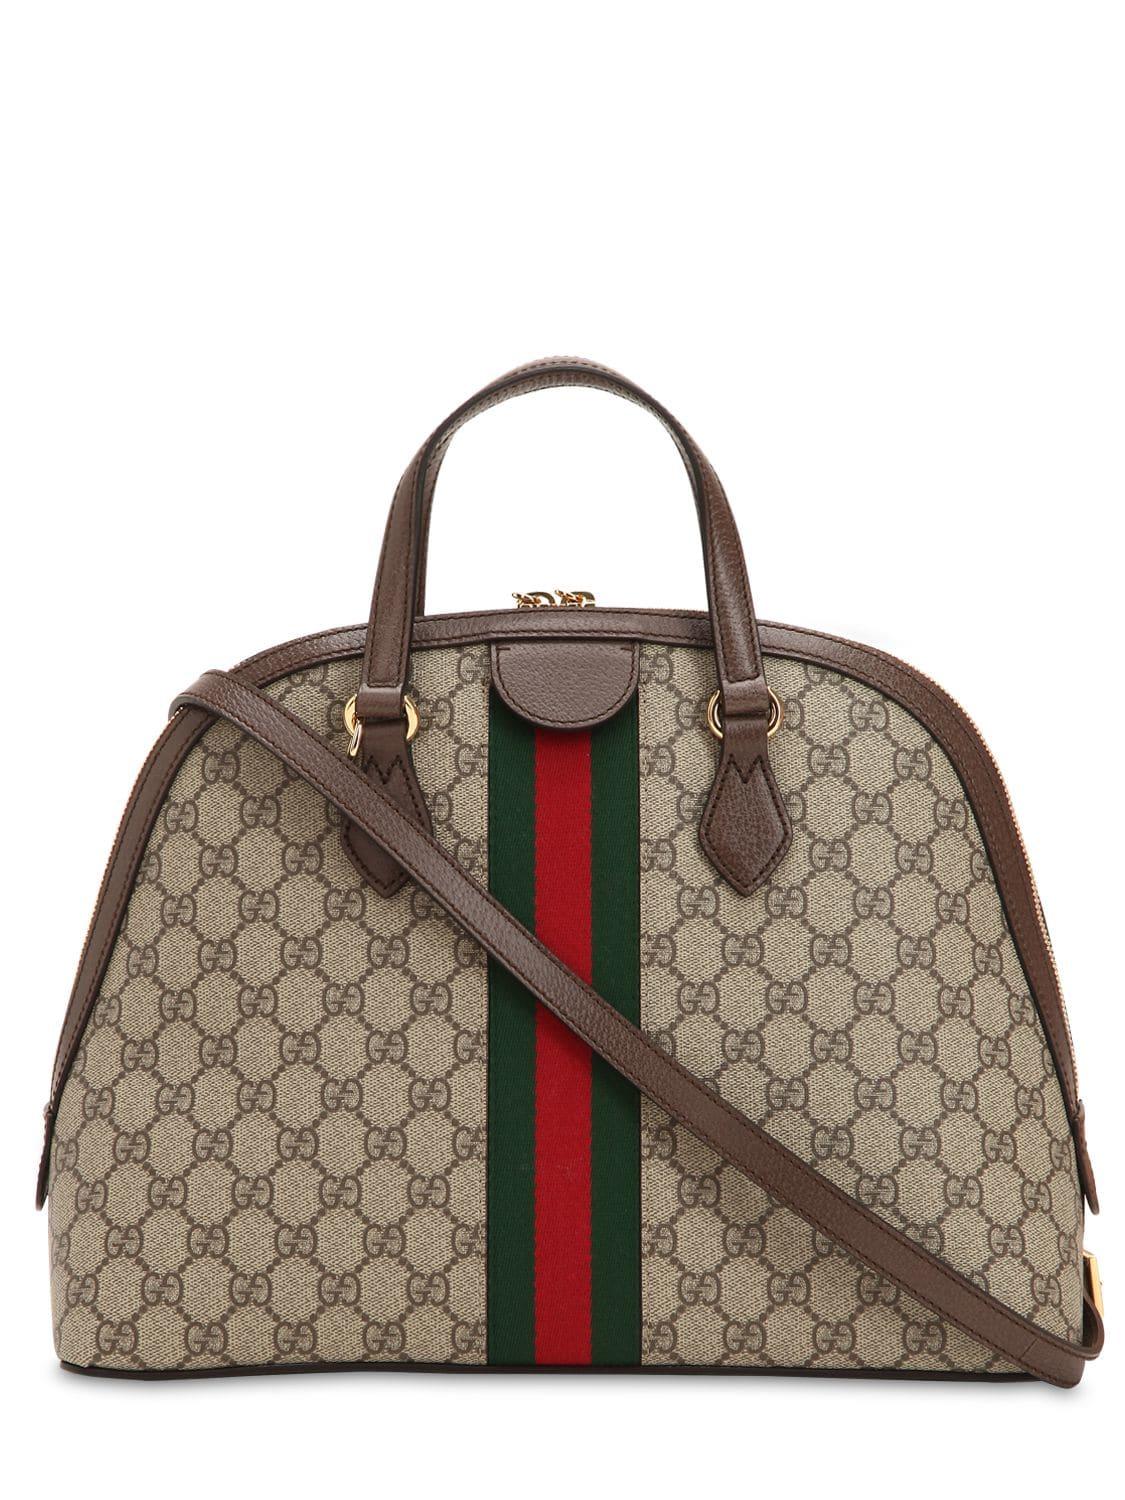 Gucci Ophidia GG Medium Top Handle Bag in Brown | Lyst